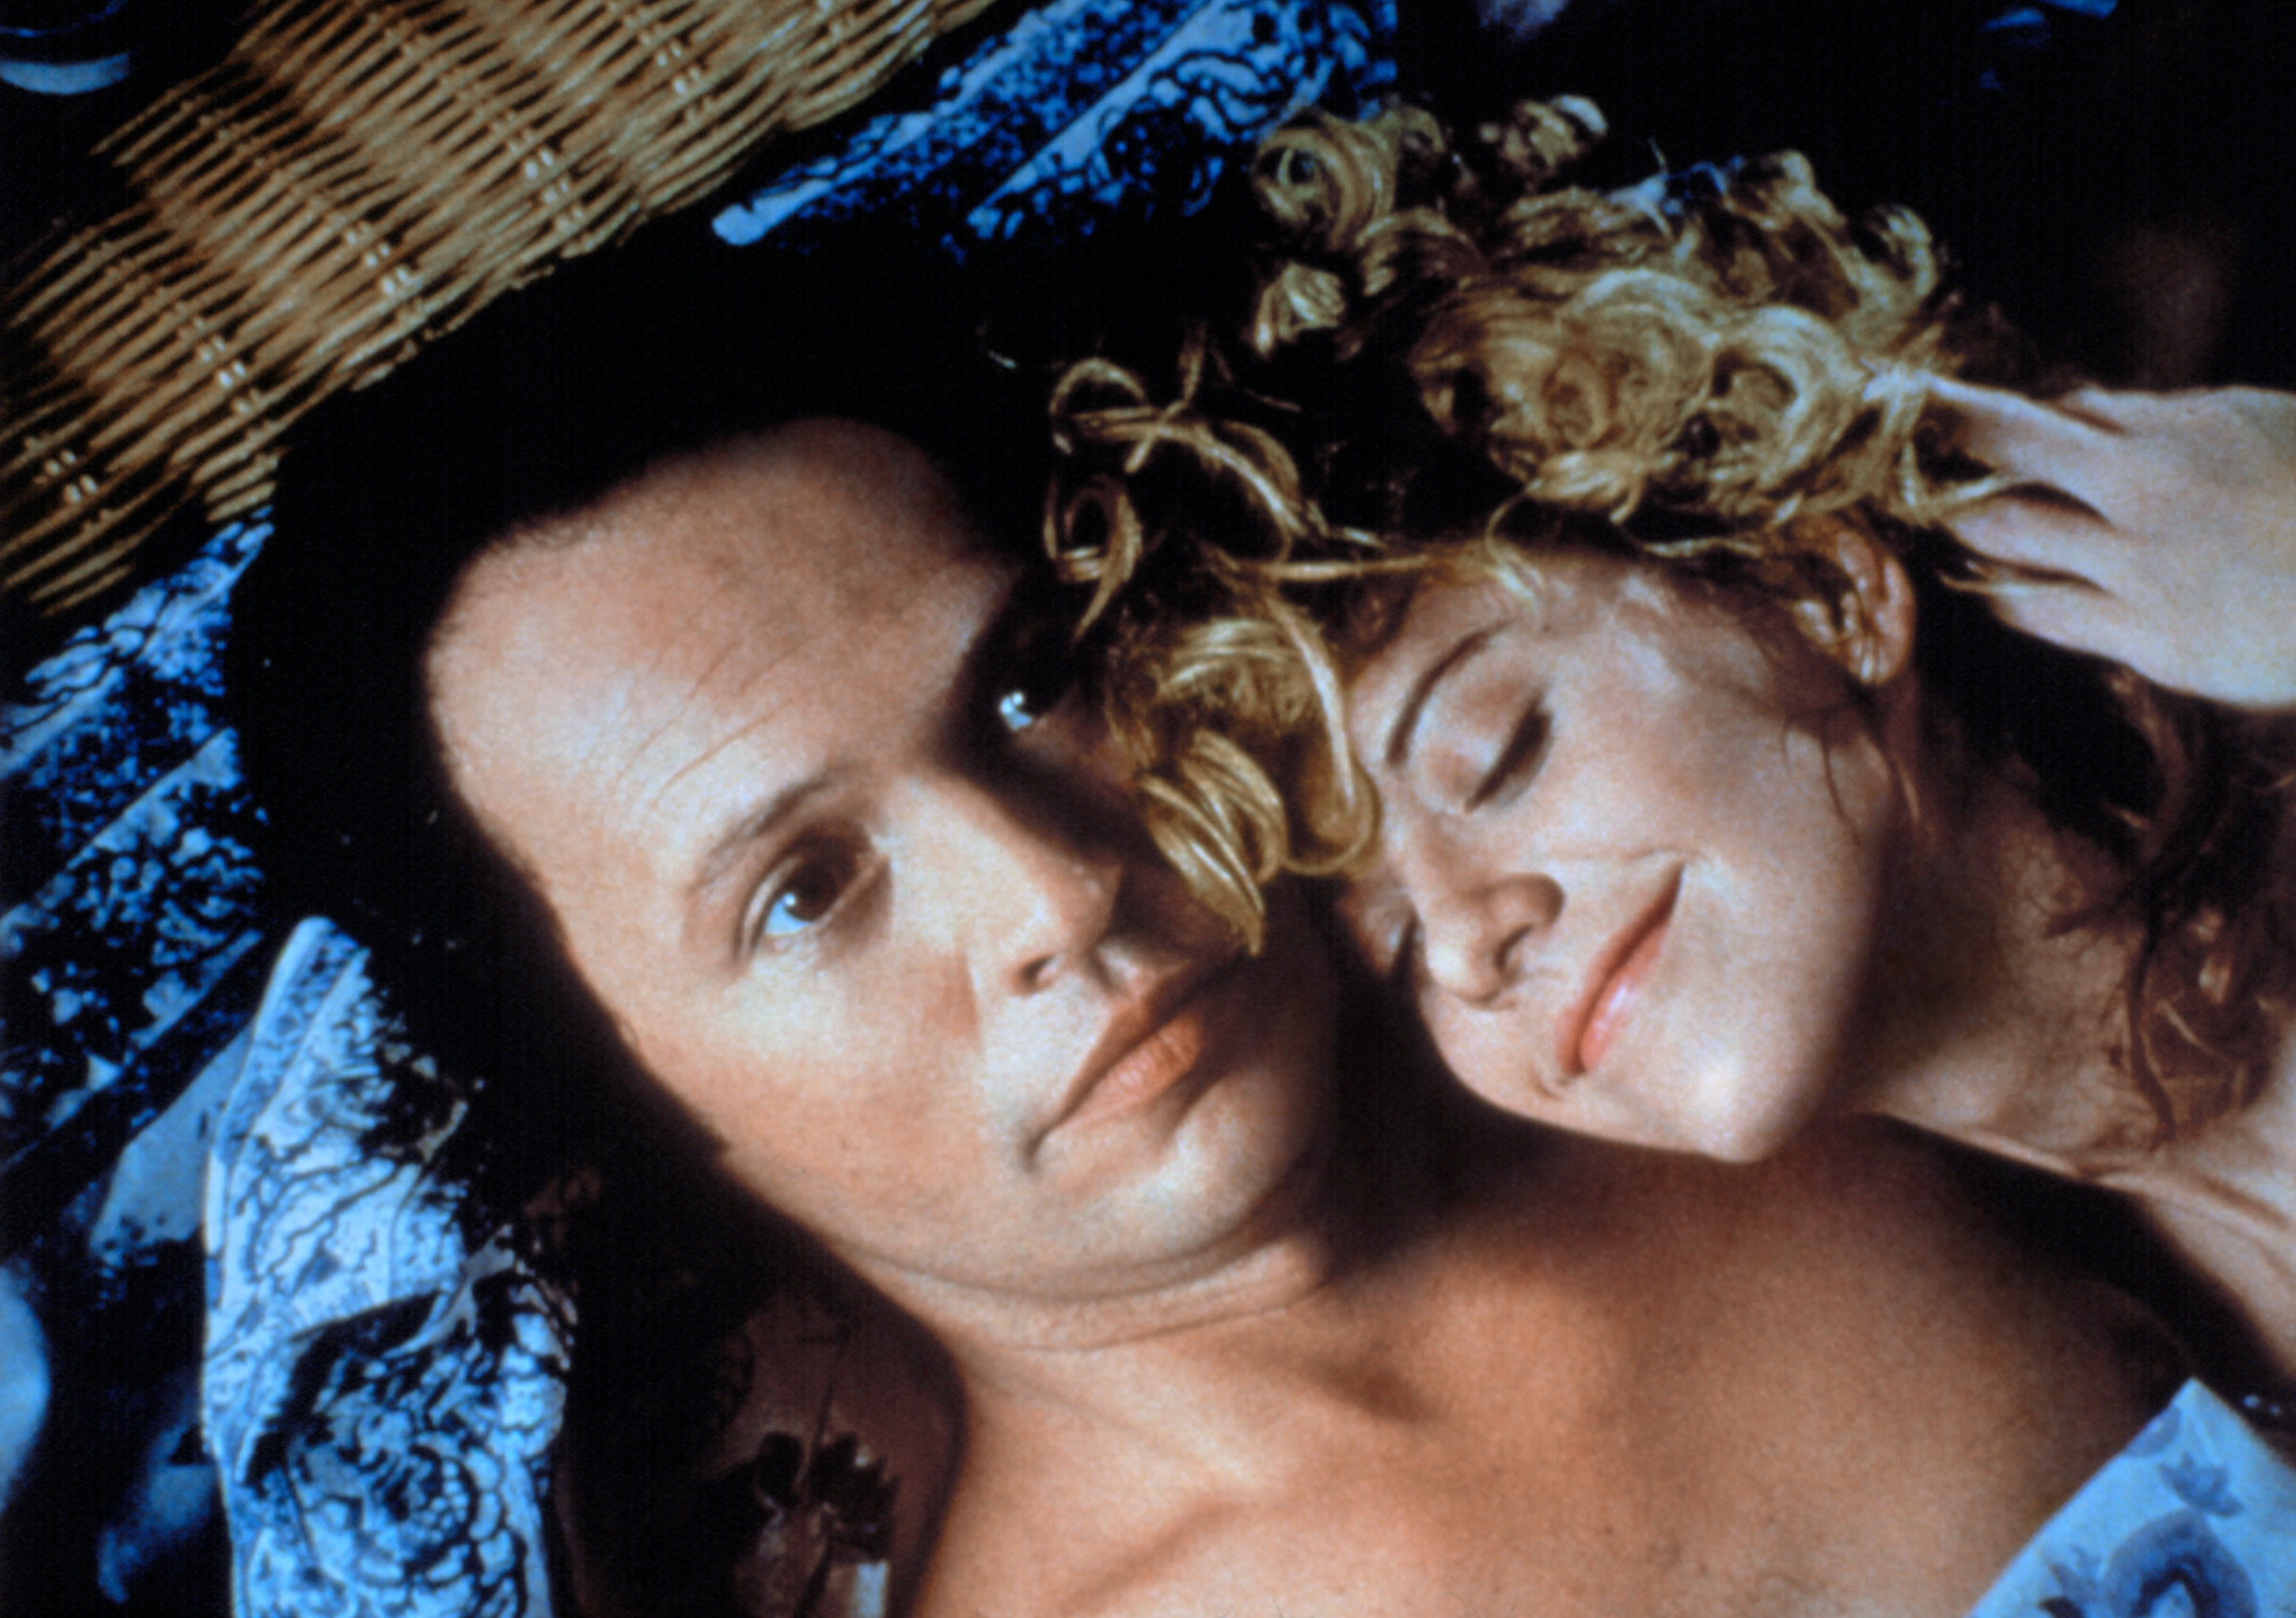 Billy Crystal and Meg Ryan lying in bed together